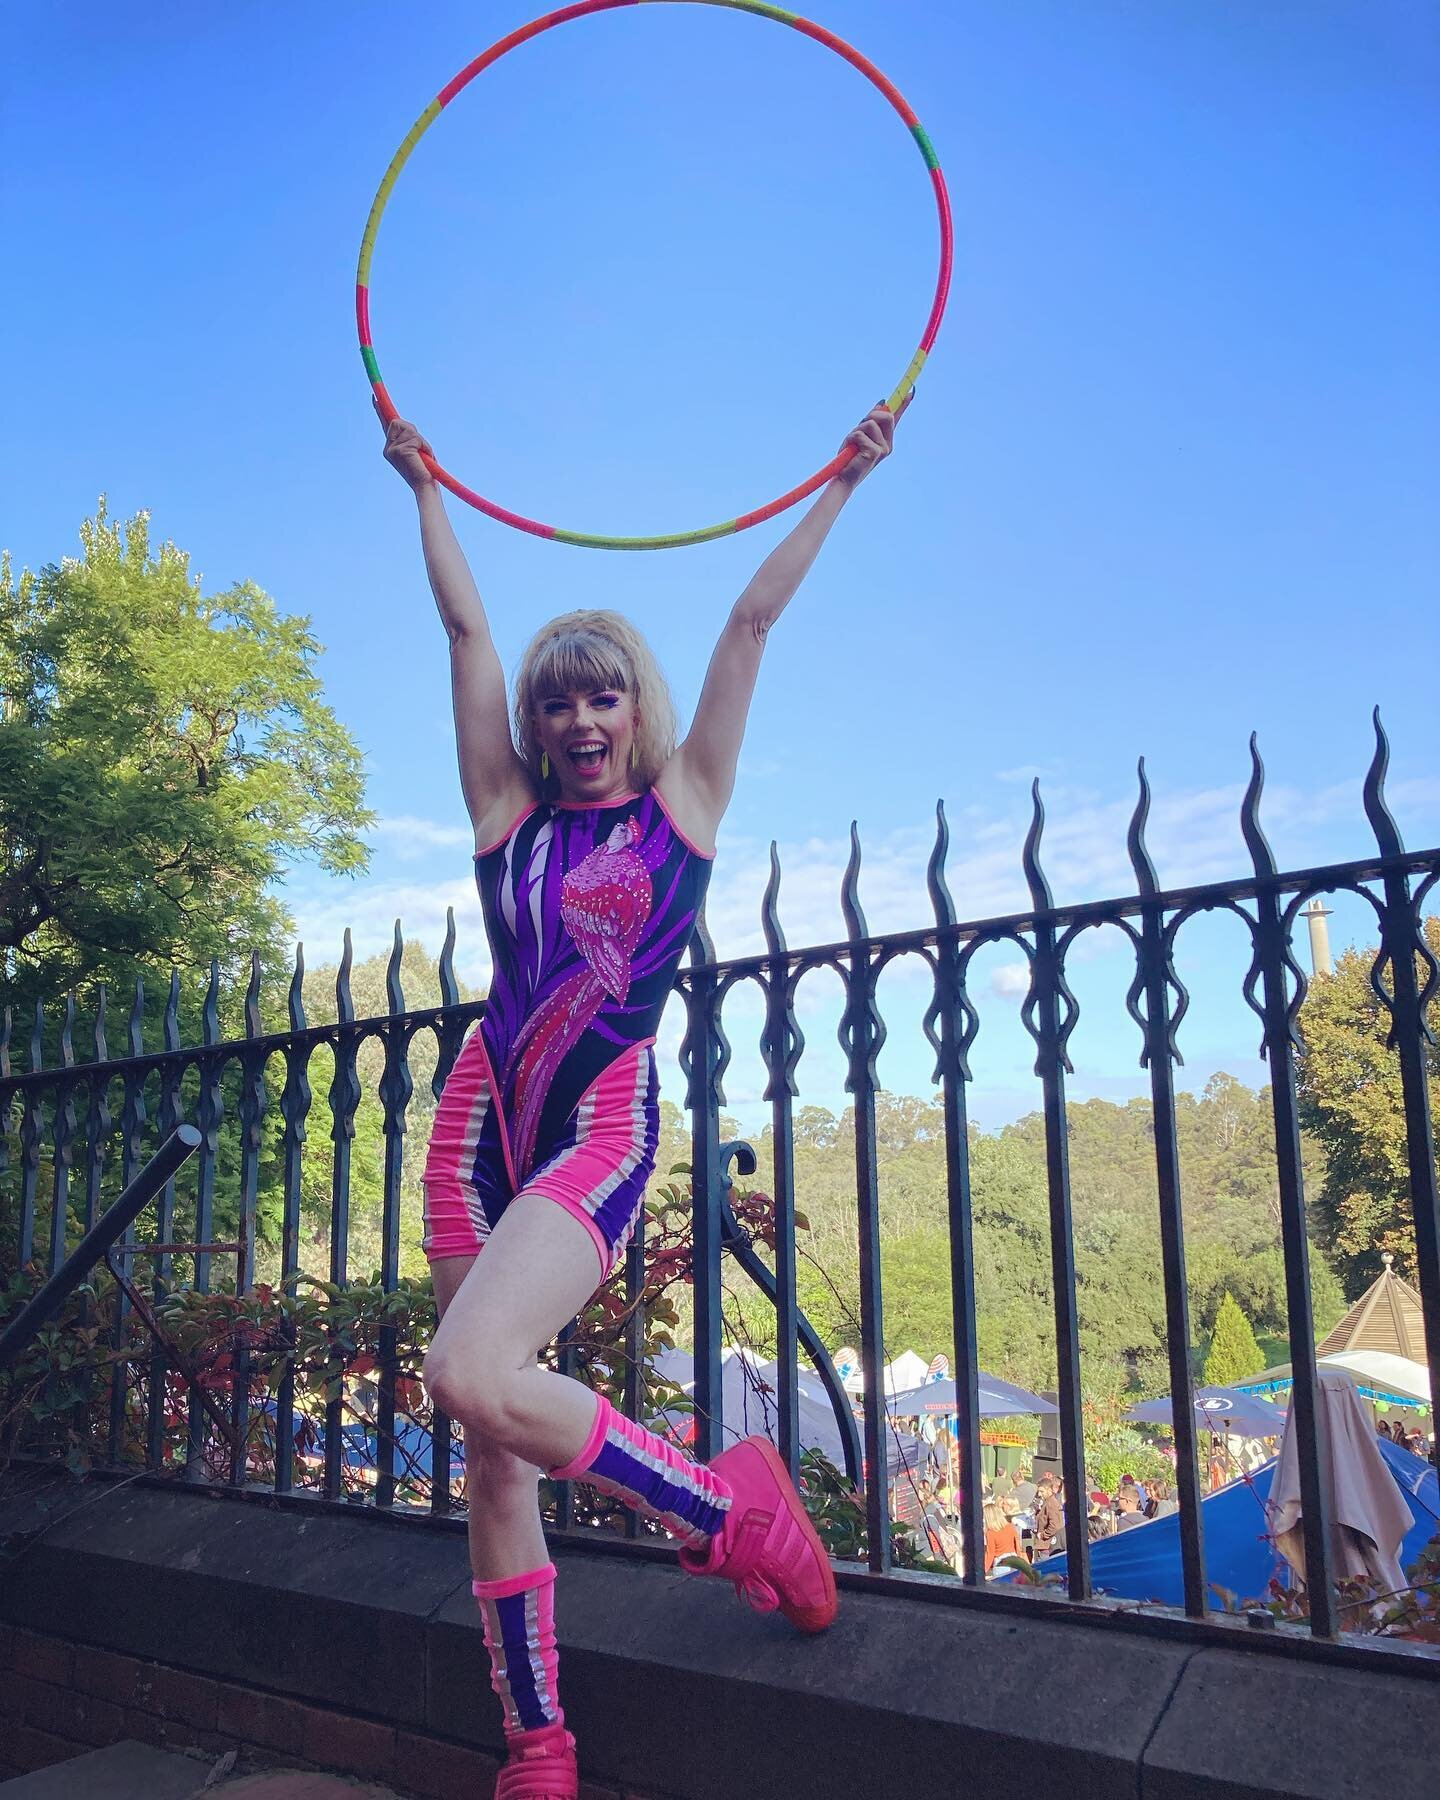 Roving today was hilarious at @abbotsfordconvent for @brewers_feast 🍻🕺🏼 Always a good time watching drunk people try and hula hoop 🤣 
#hulahoopersofinstagram #hulahoop #hooper #rovinghulahoop #festivalentertainment